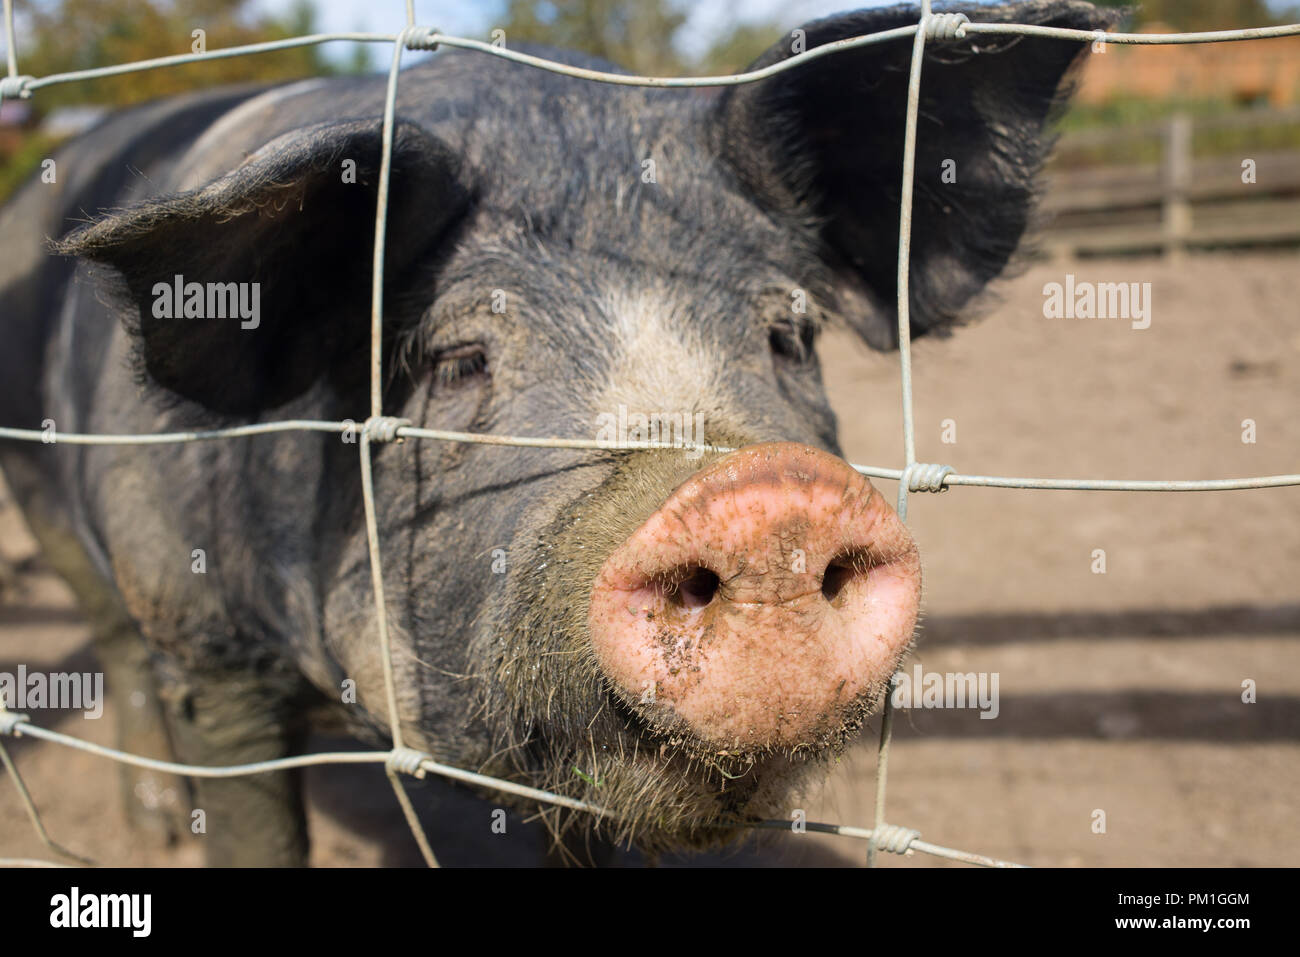 Large Black British pig a breed of domestic pig with focus on dirty muddy nose Stock Photo